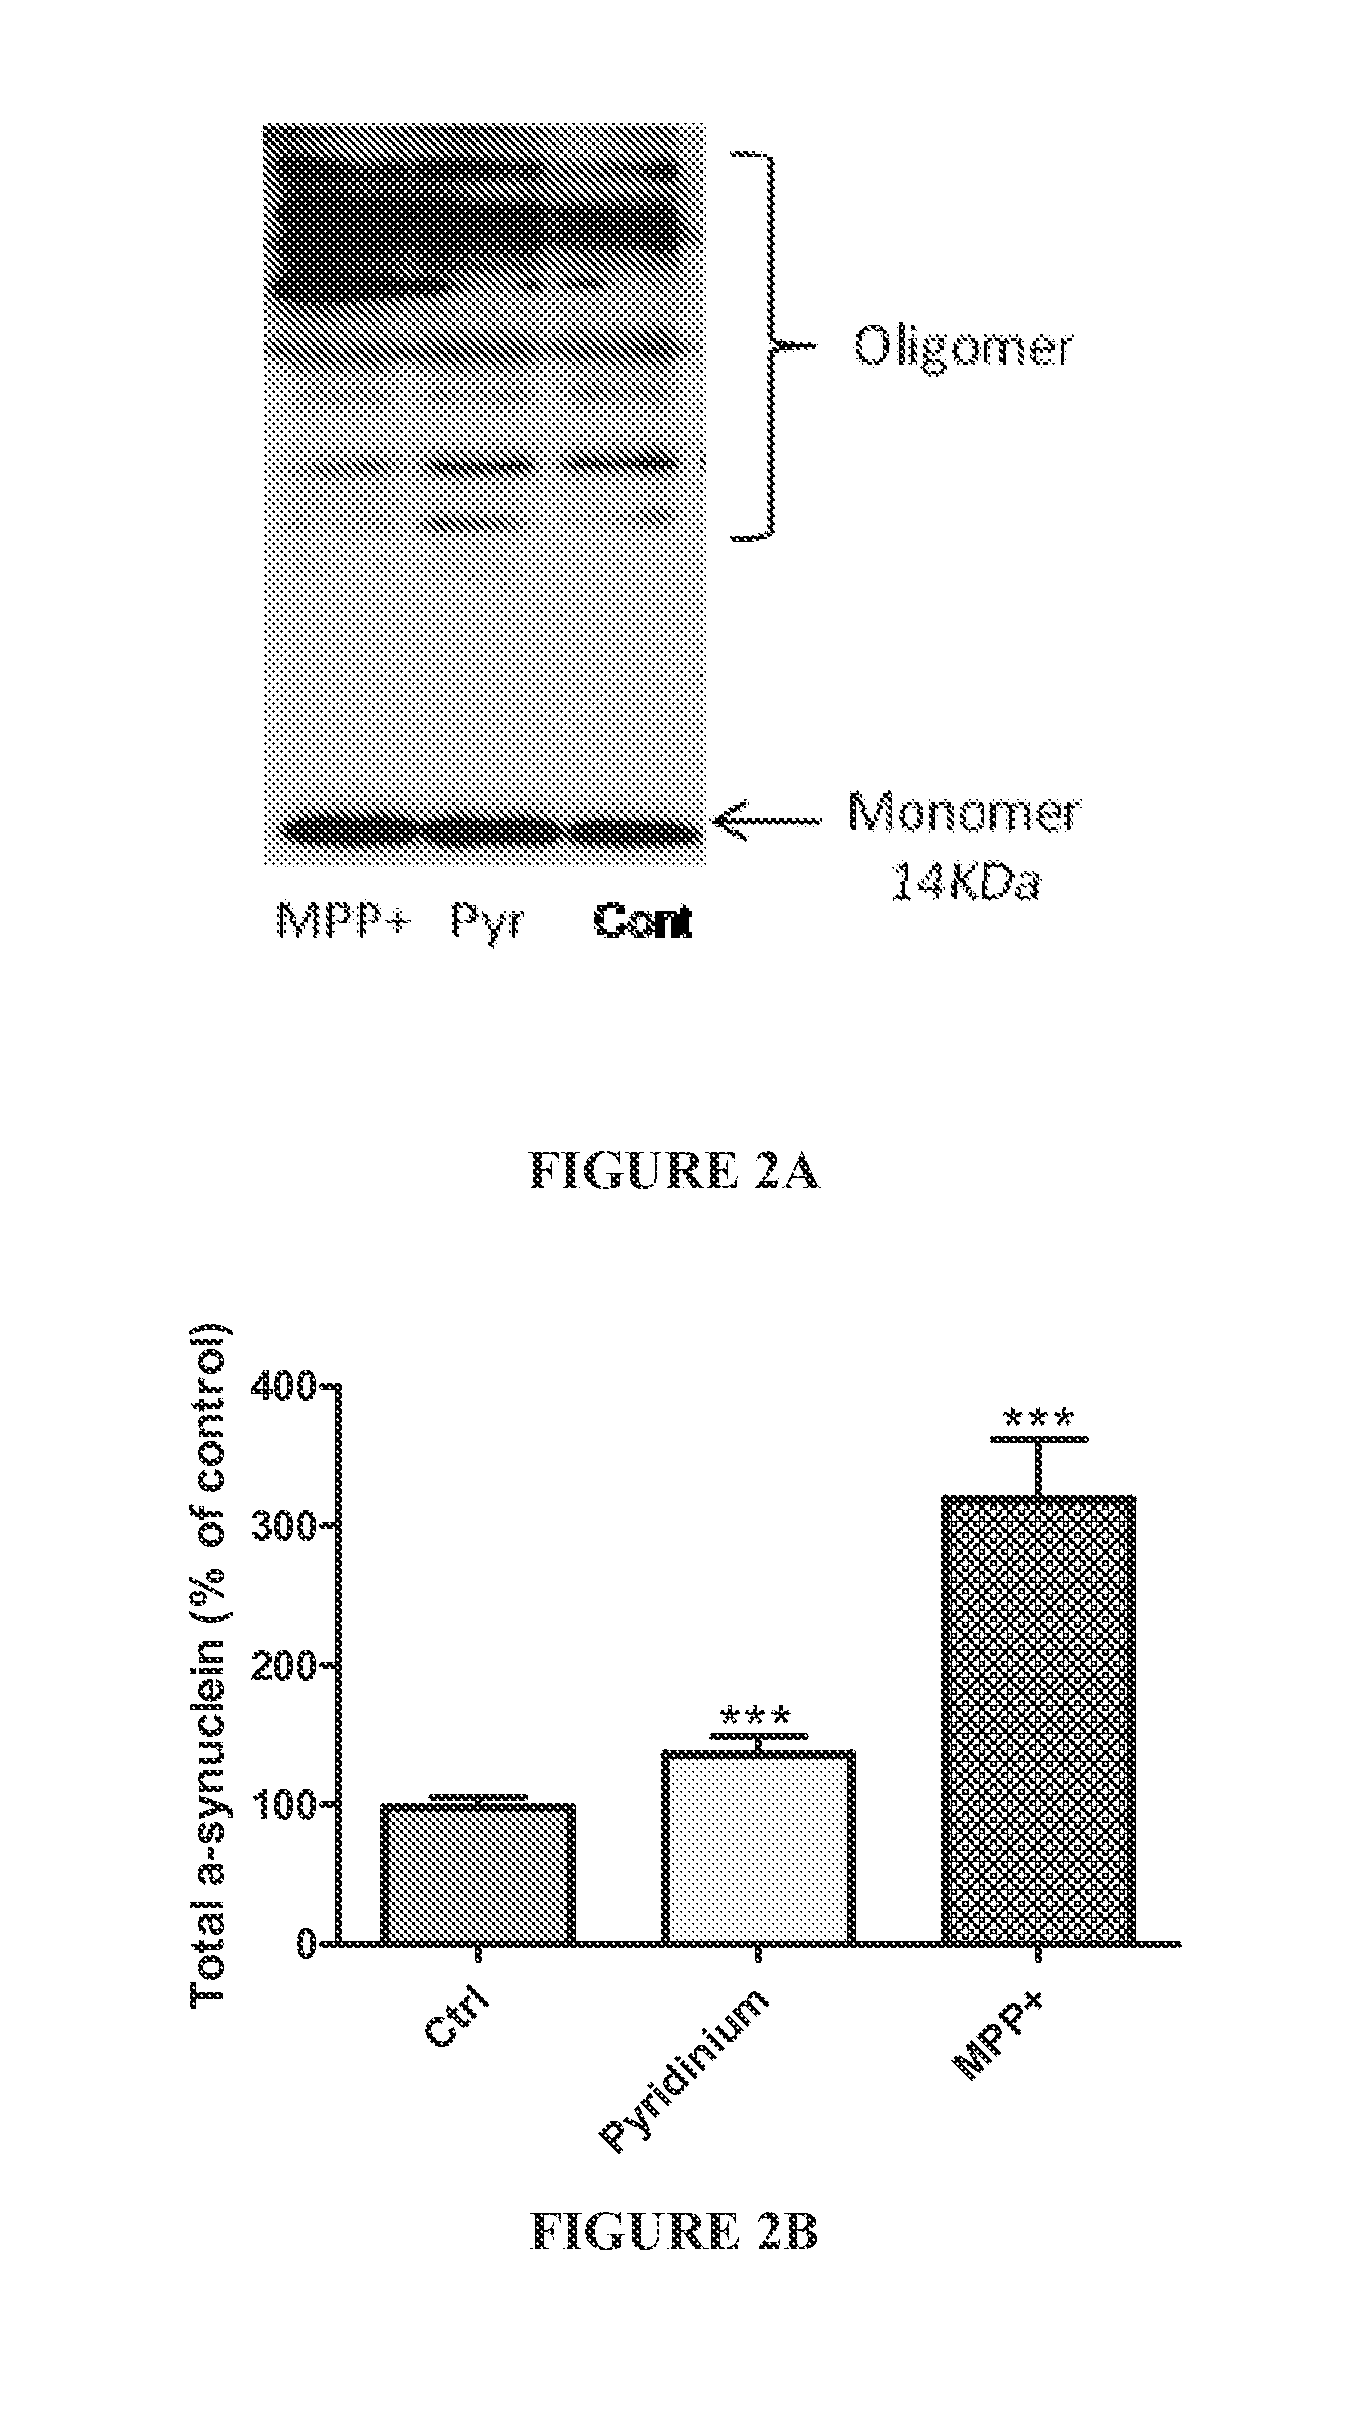 Chemical model of a neurodegenerative disease, method for preparation and uses of same